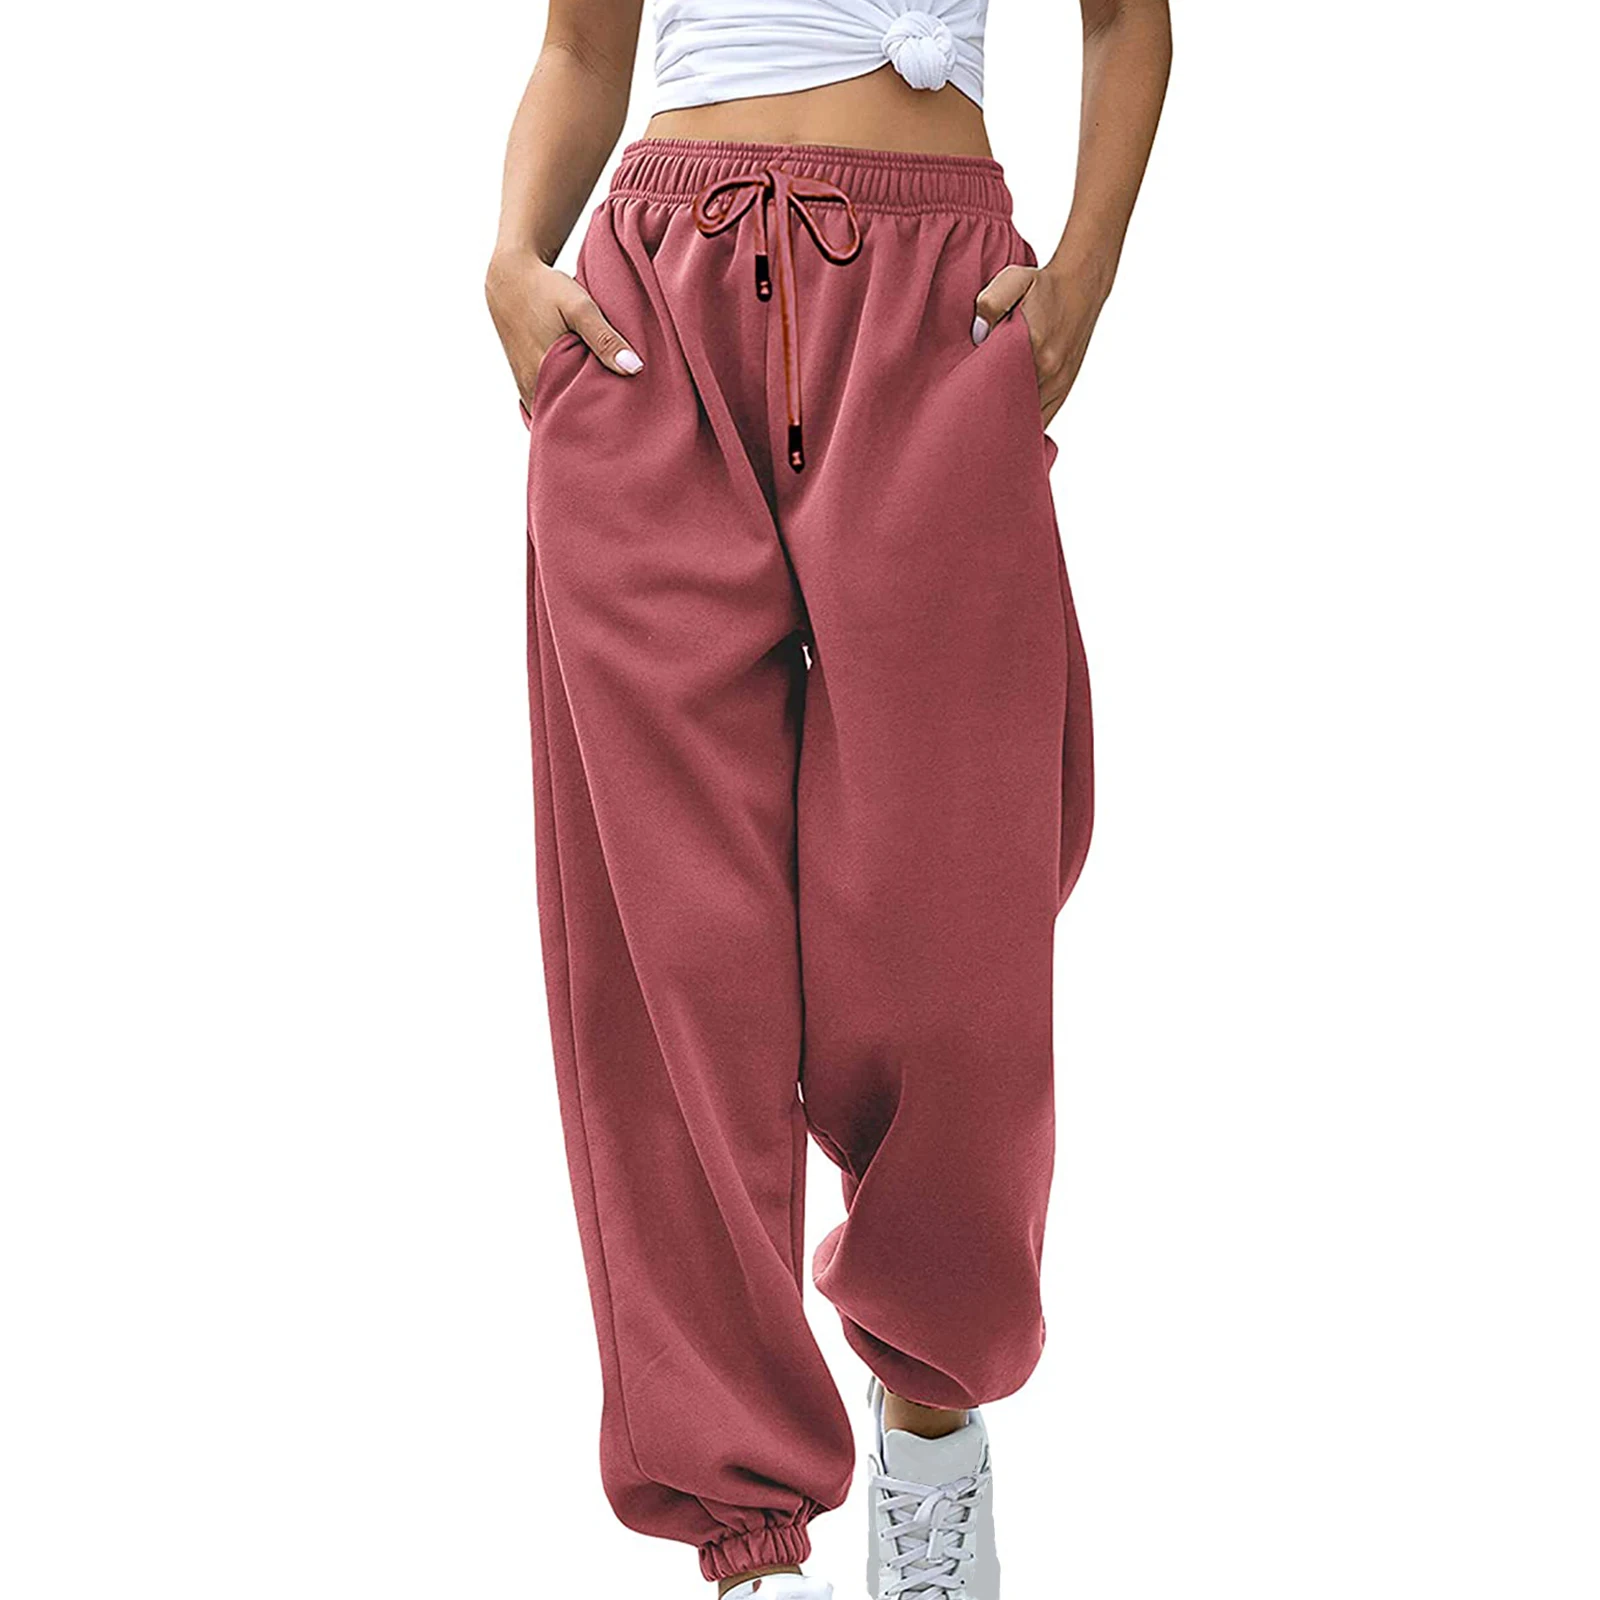 

wsevypo Casual Women's Drawstring Joggers Trousers Solid Color High Waist Loose Sweatpants Hip Hop Streetwear Sports Pants